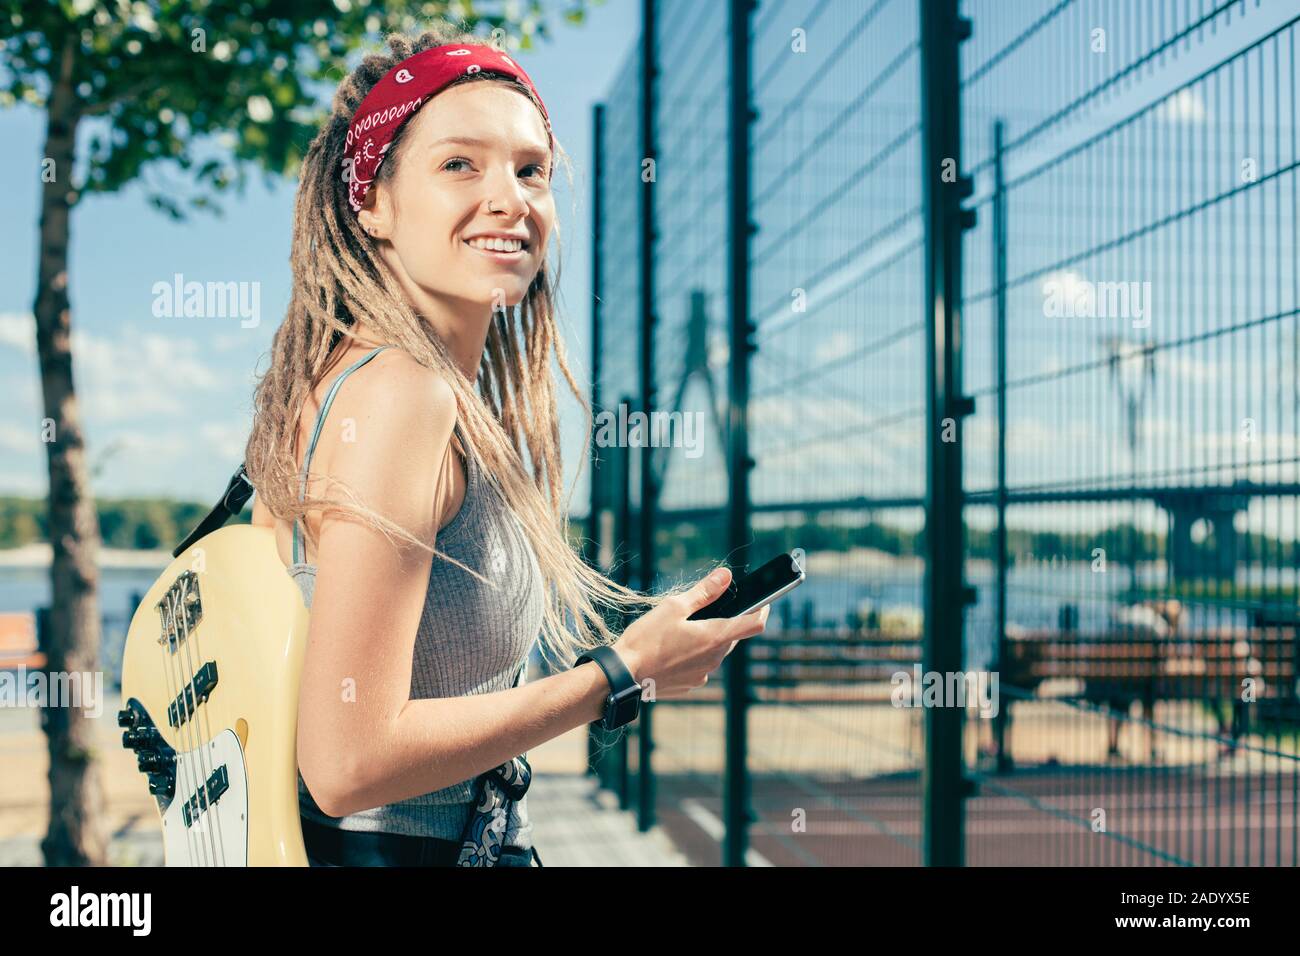 Emotional lady smiling while carrying her guitar and smartphone Stock Photo